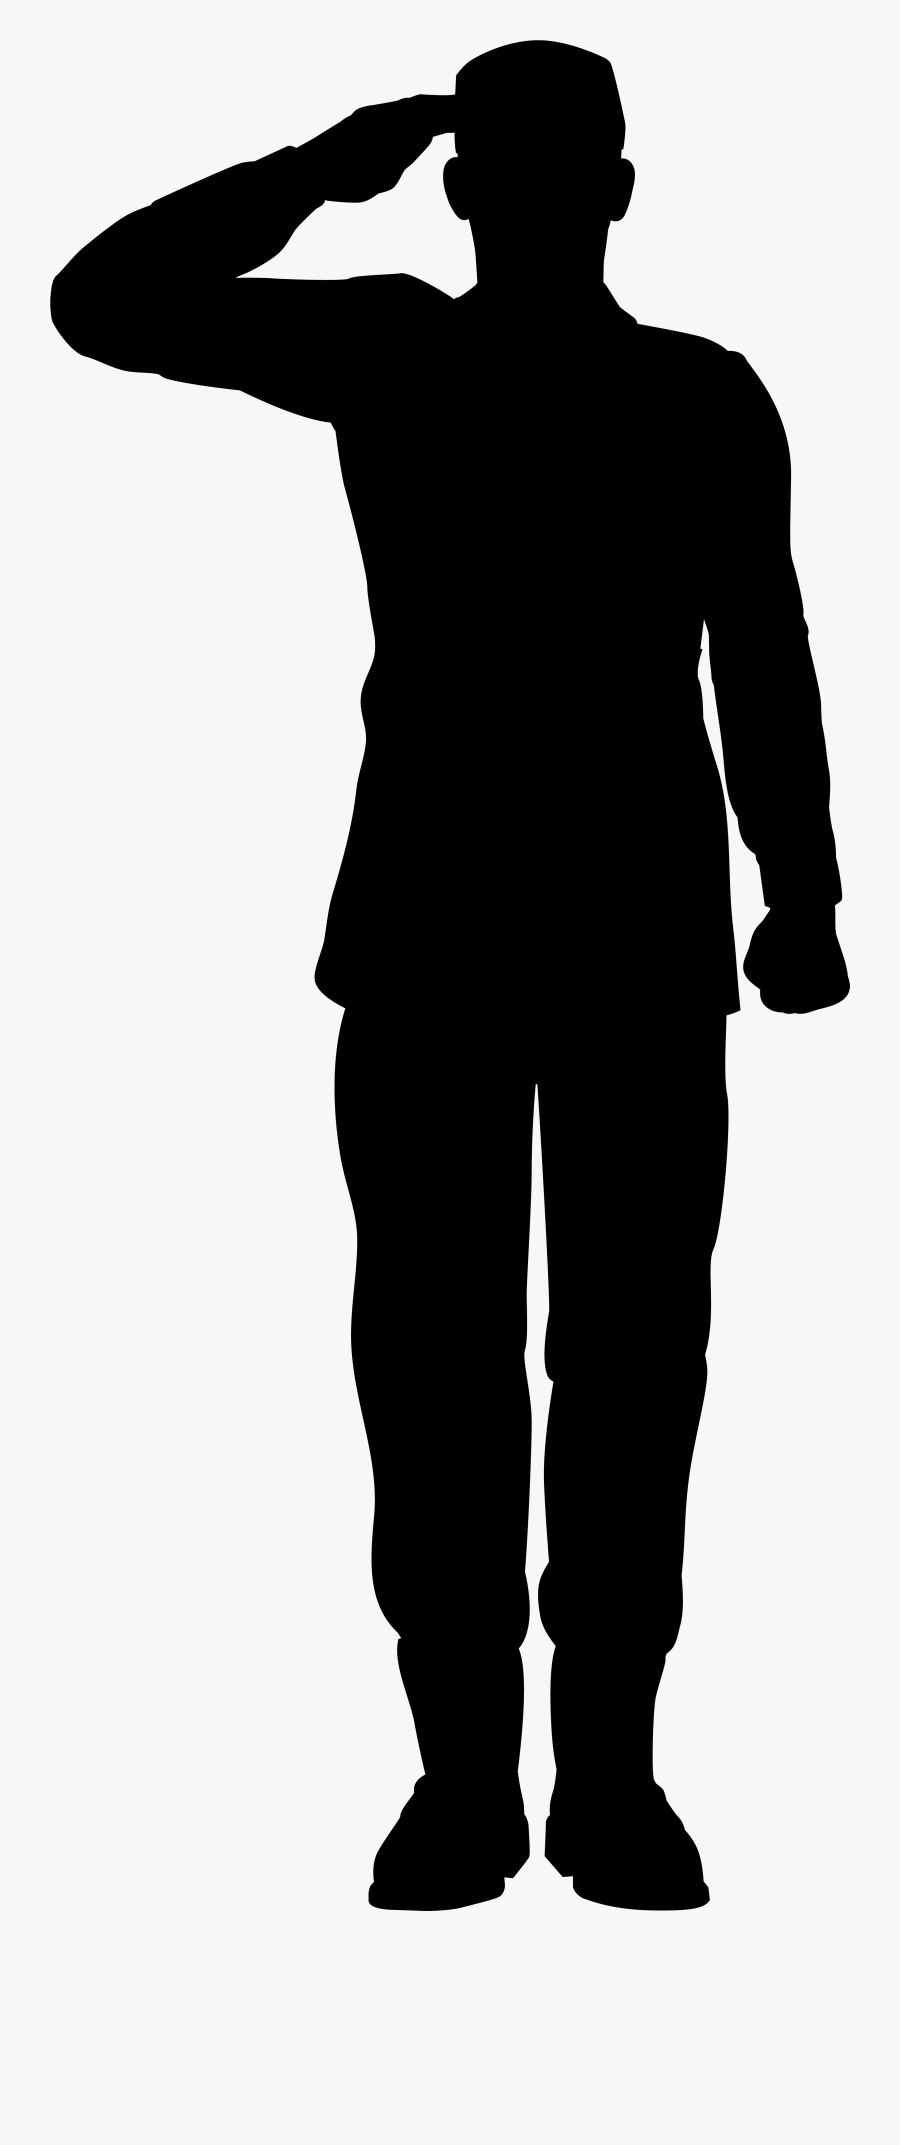 Thumb Image - Soldier Silhouette Png, Transparent Clipart